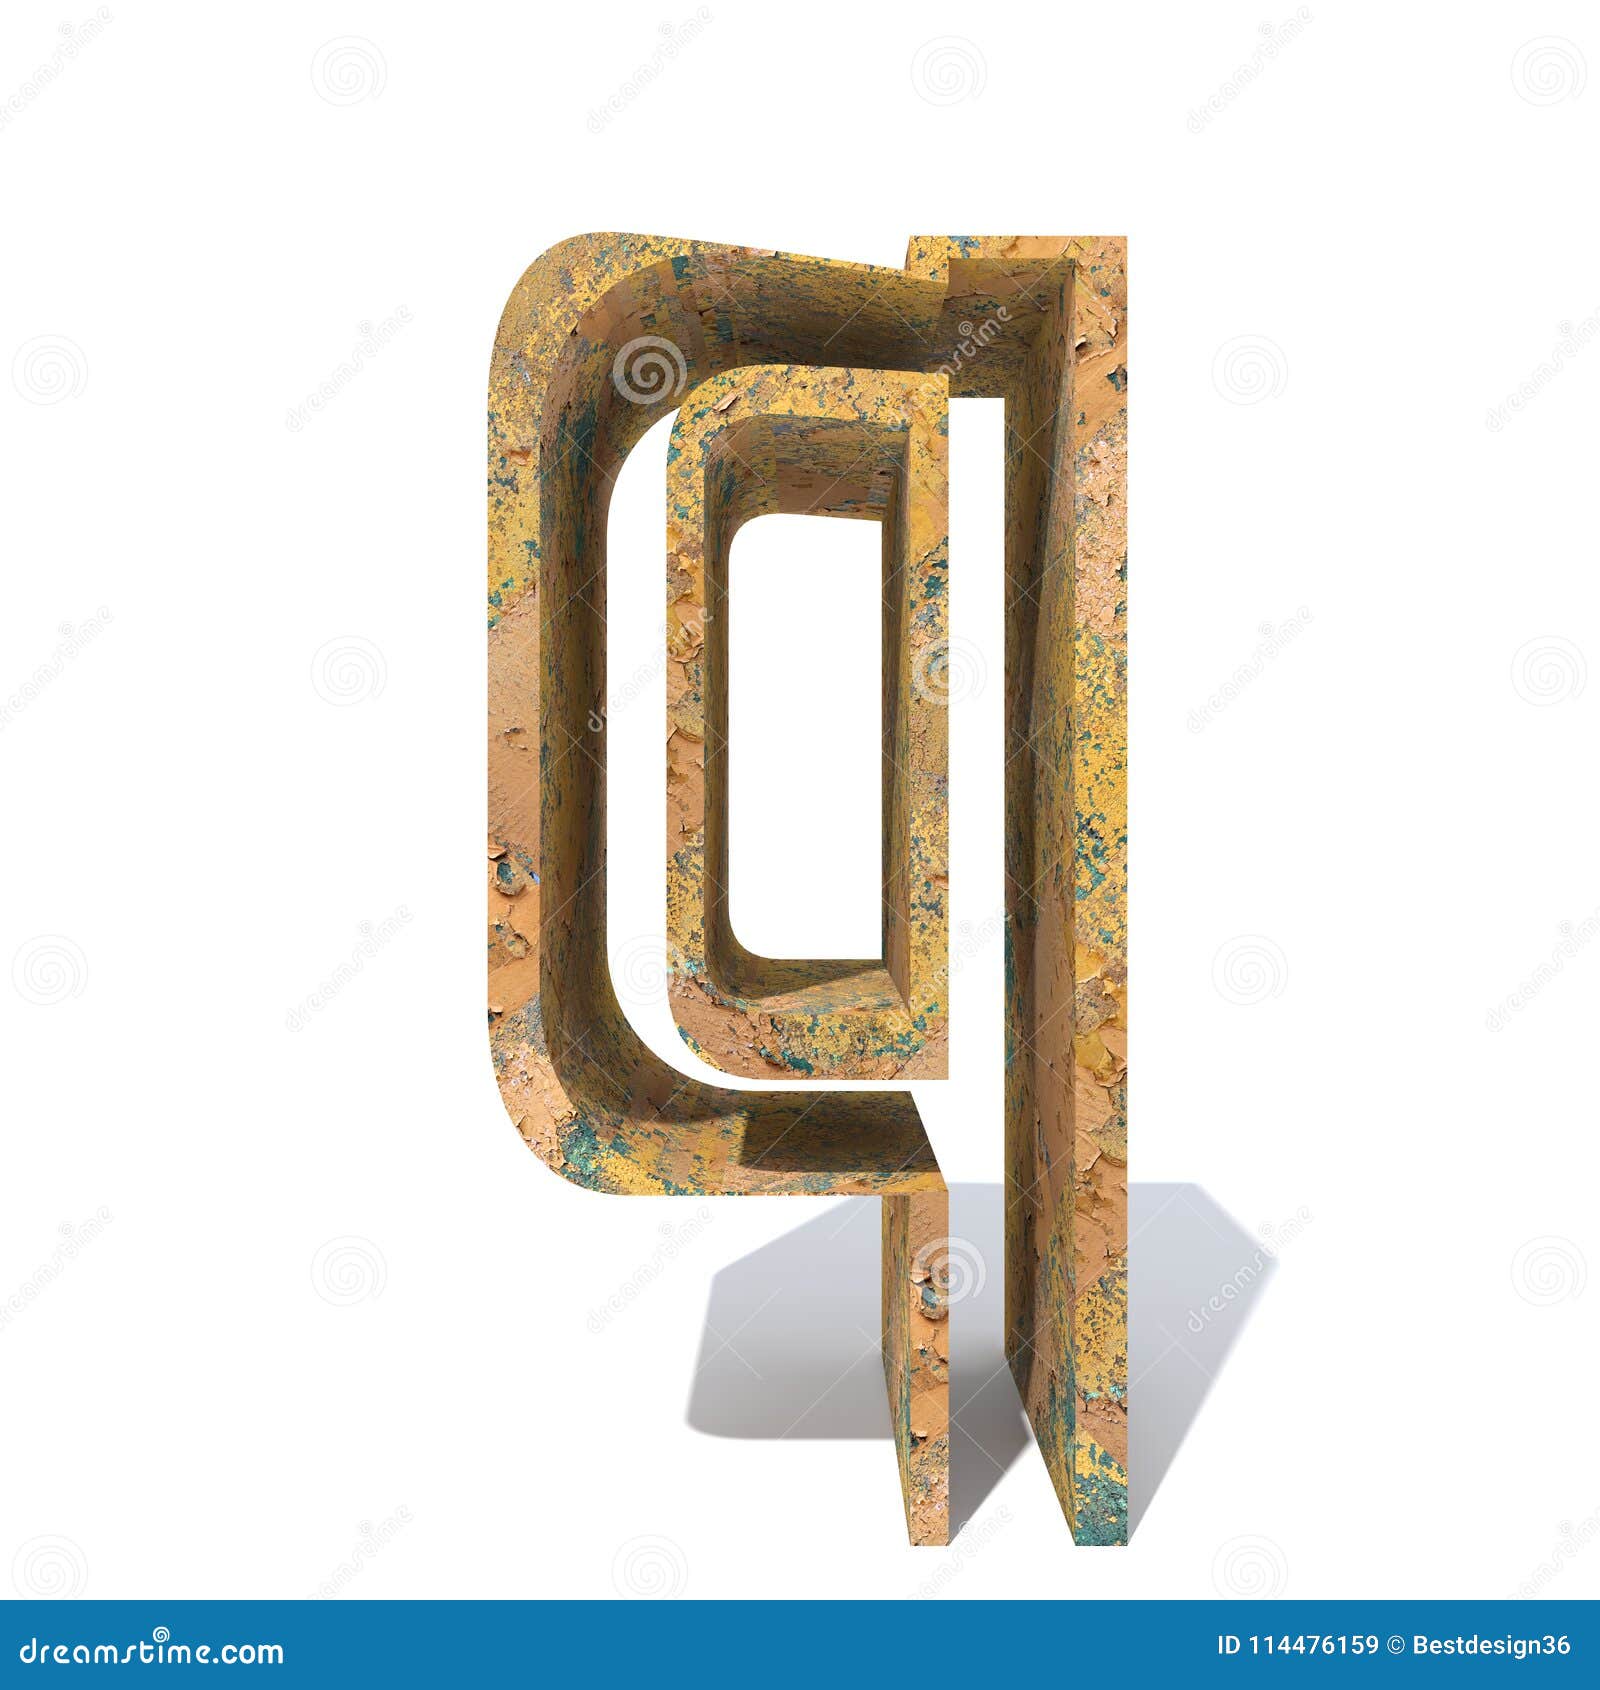 old rusted metal font or type, iron steel industry piecekground. educative rusty material, aged v